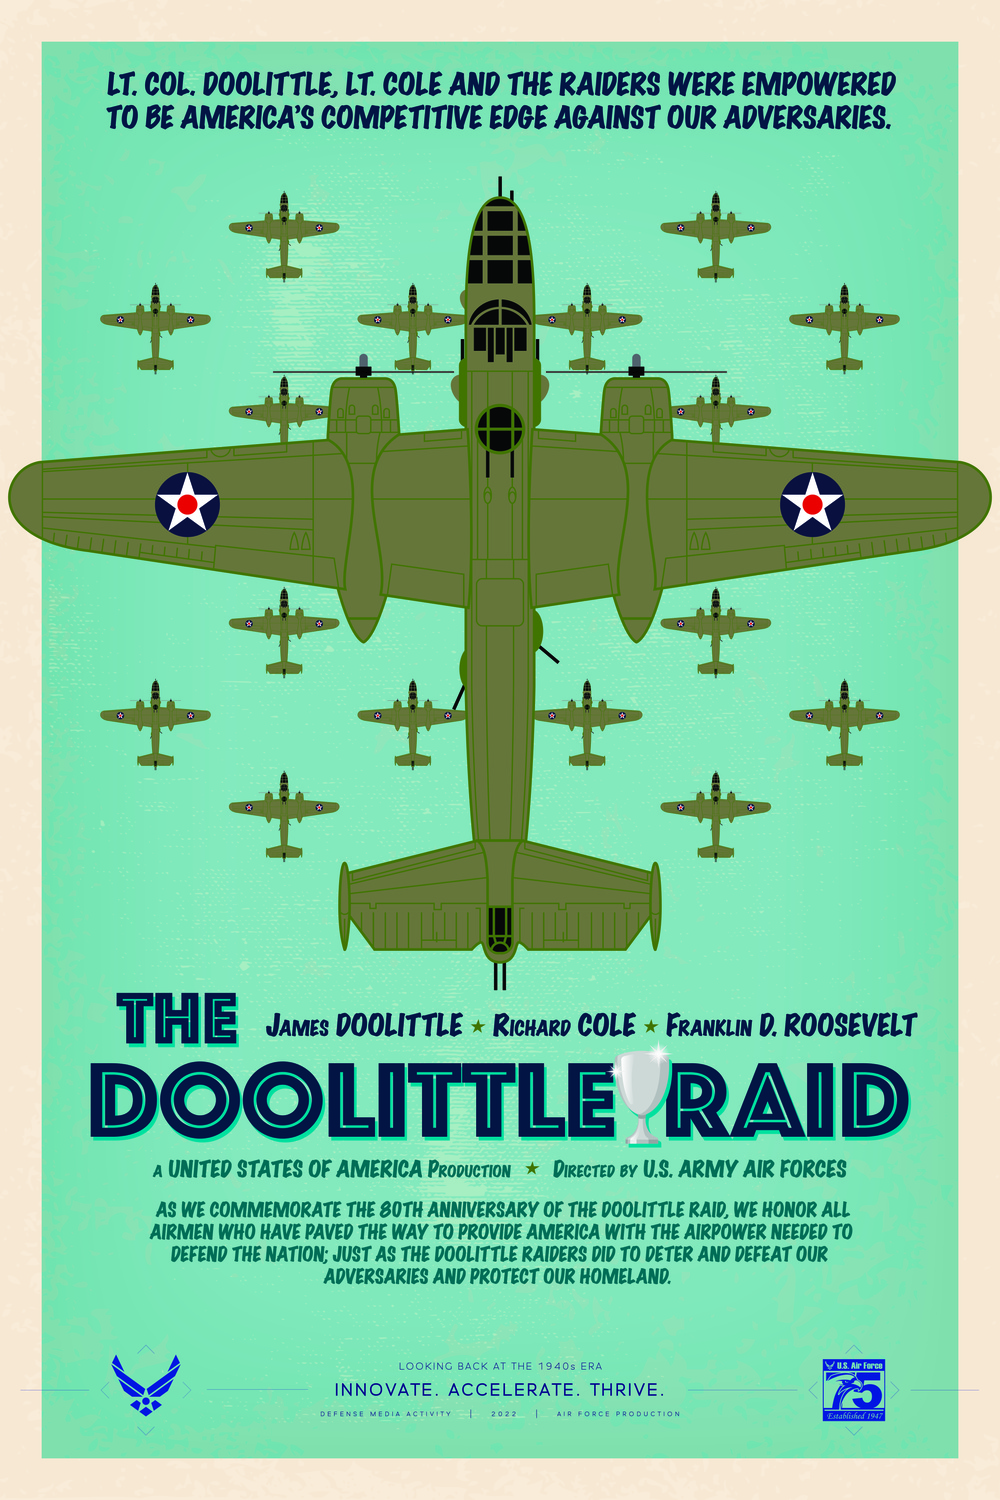 Air Force 75th Anniversary Commemorative Graphic - The Doolittle Raid